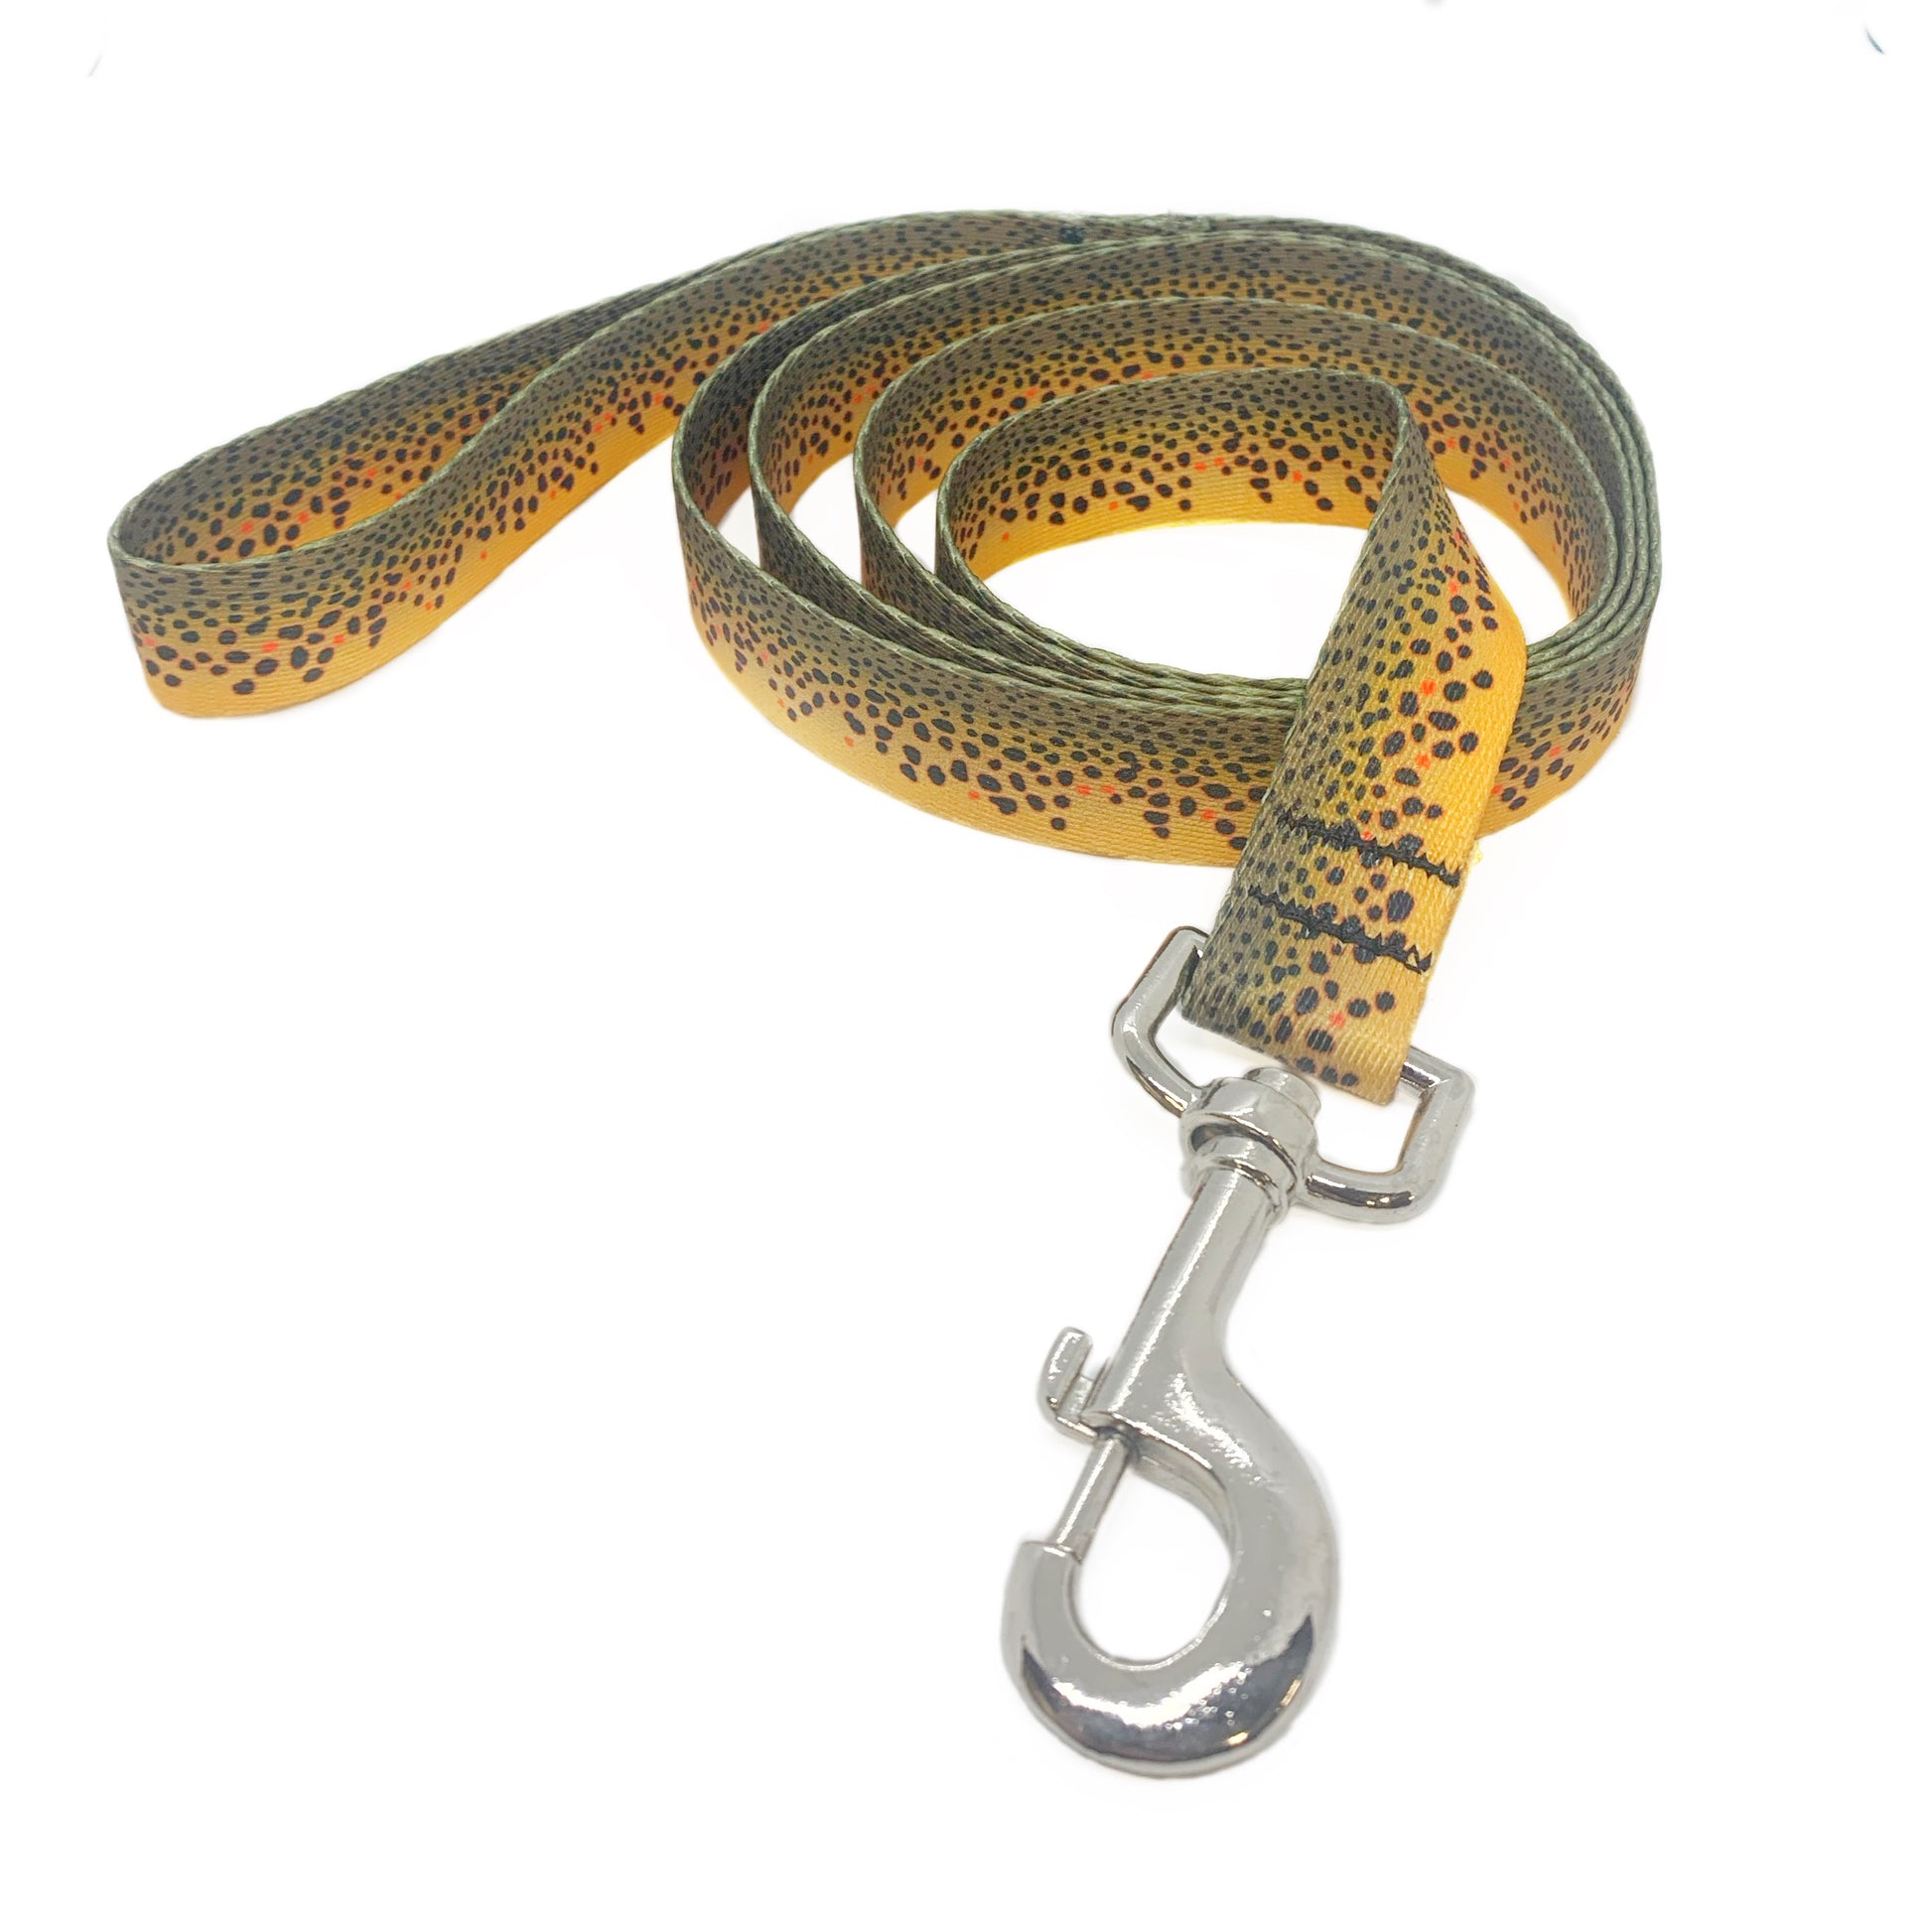 A dog leash with the pattern of brown trout skin printed on it